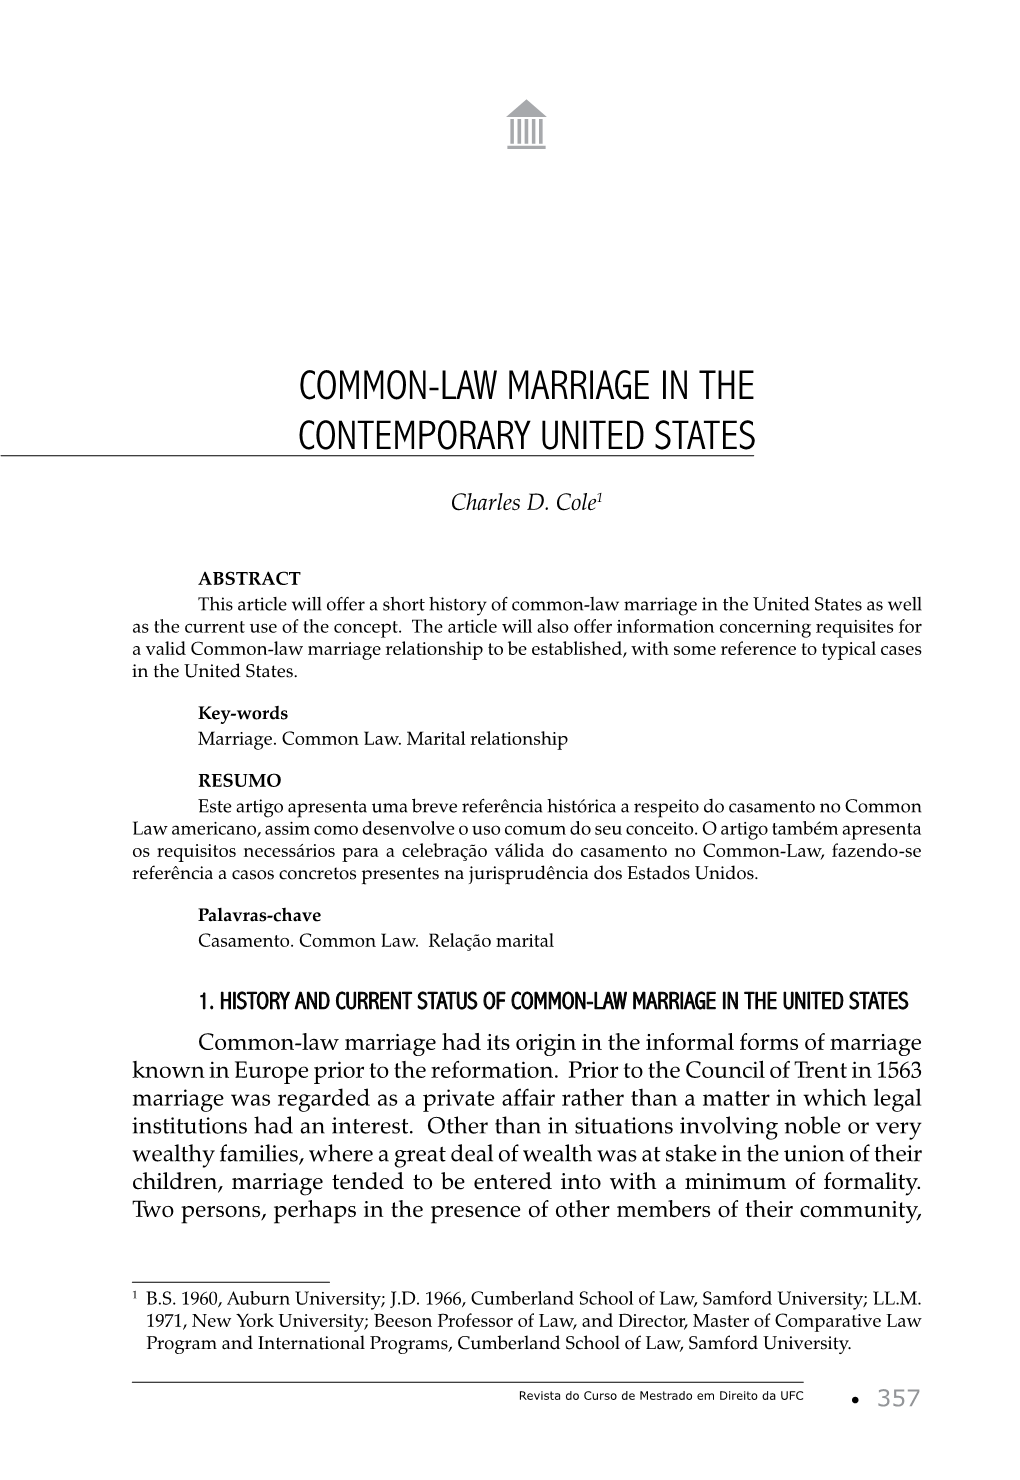 Common-Law Marriage in the Contemporary United States